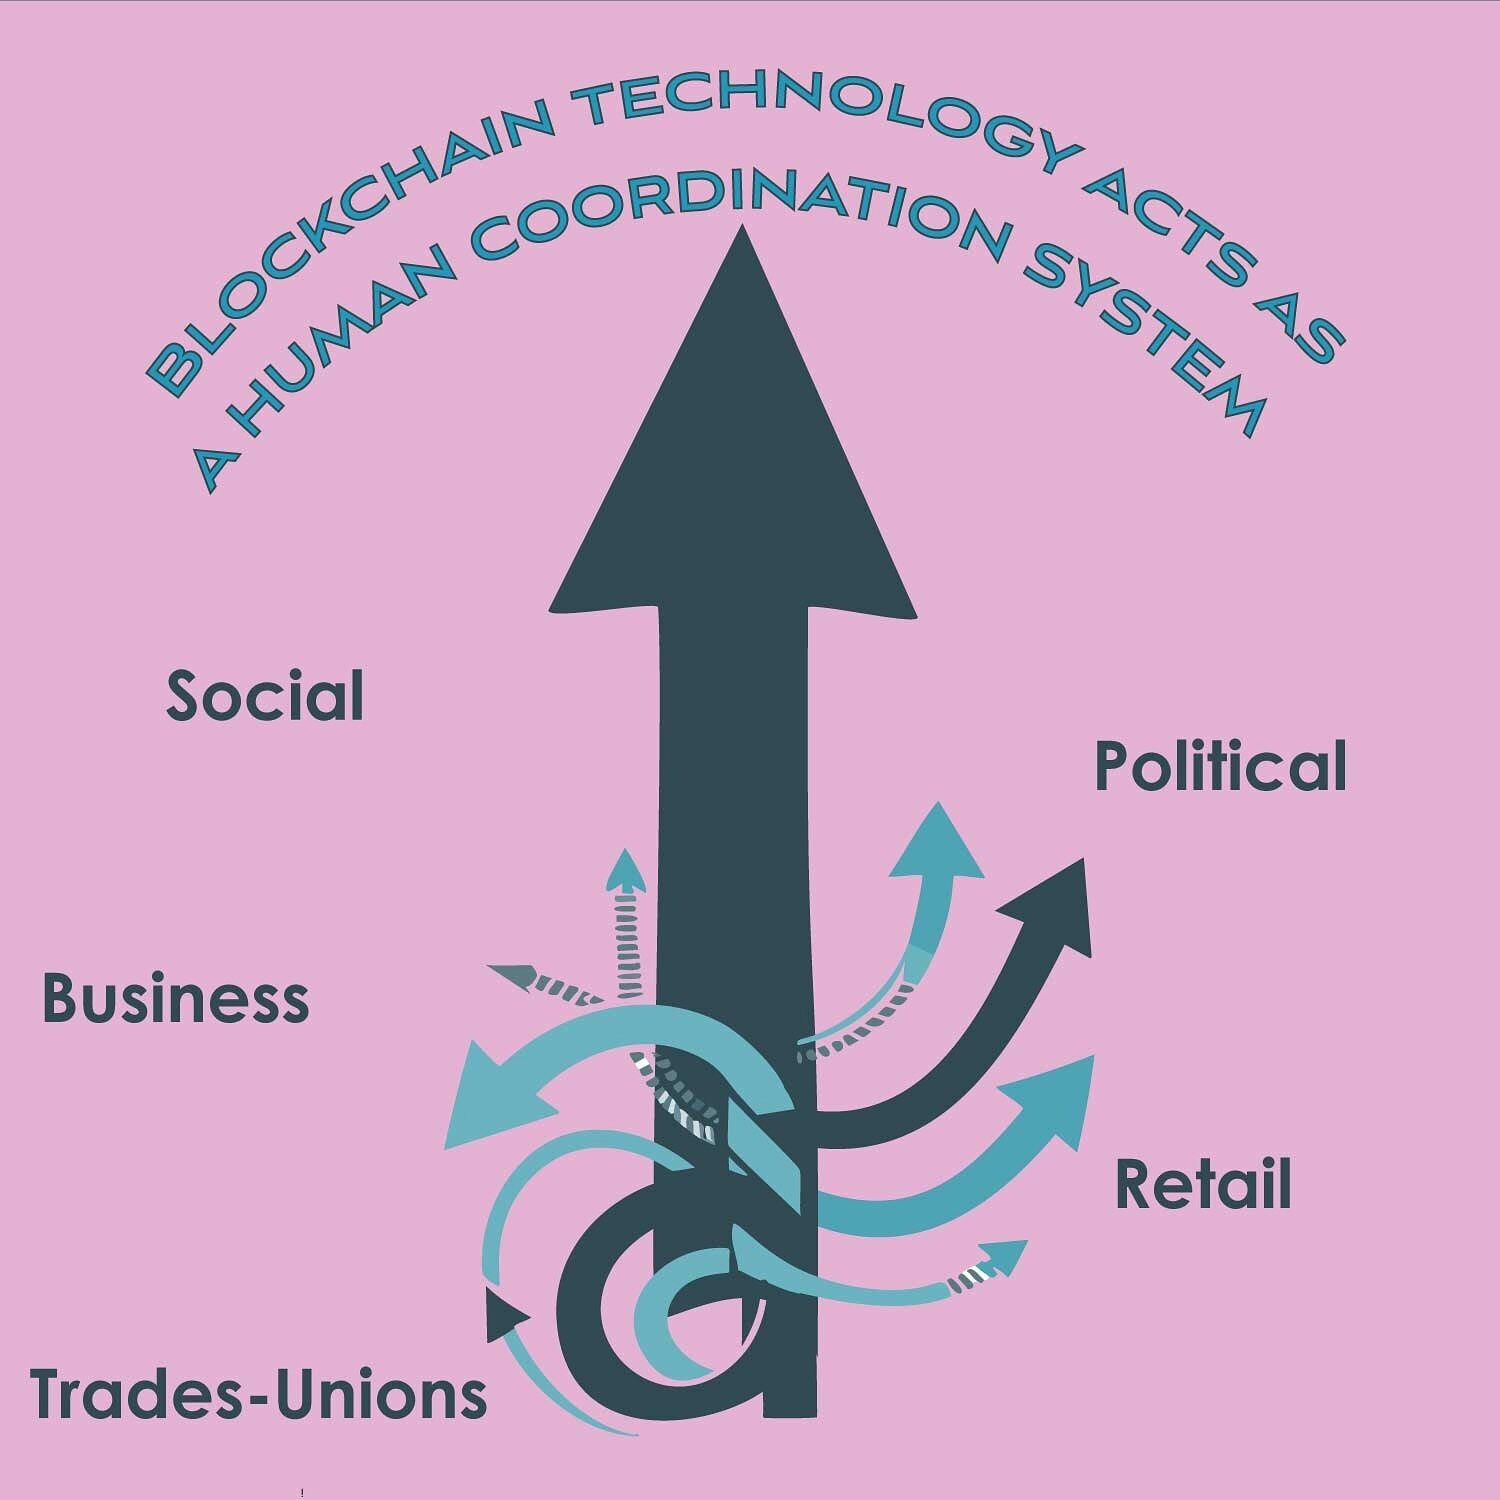 COMMUNITY | POWER | CONTROL
&nbsp;
Blockchain technology acts as a human coordination system that enables social, political, business, retail, trades-union, and community-owned networks.

#community #blockchain #holochain 
#cotton #IndianCotton #weav